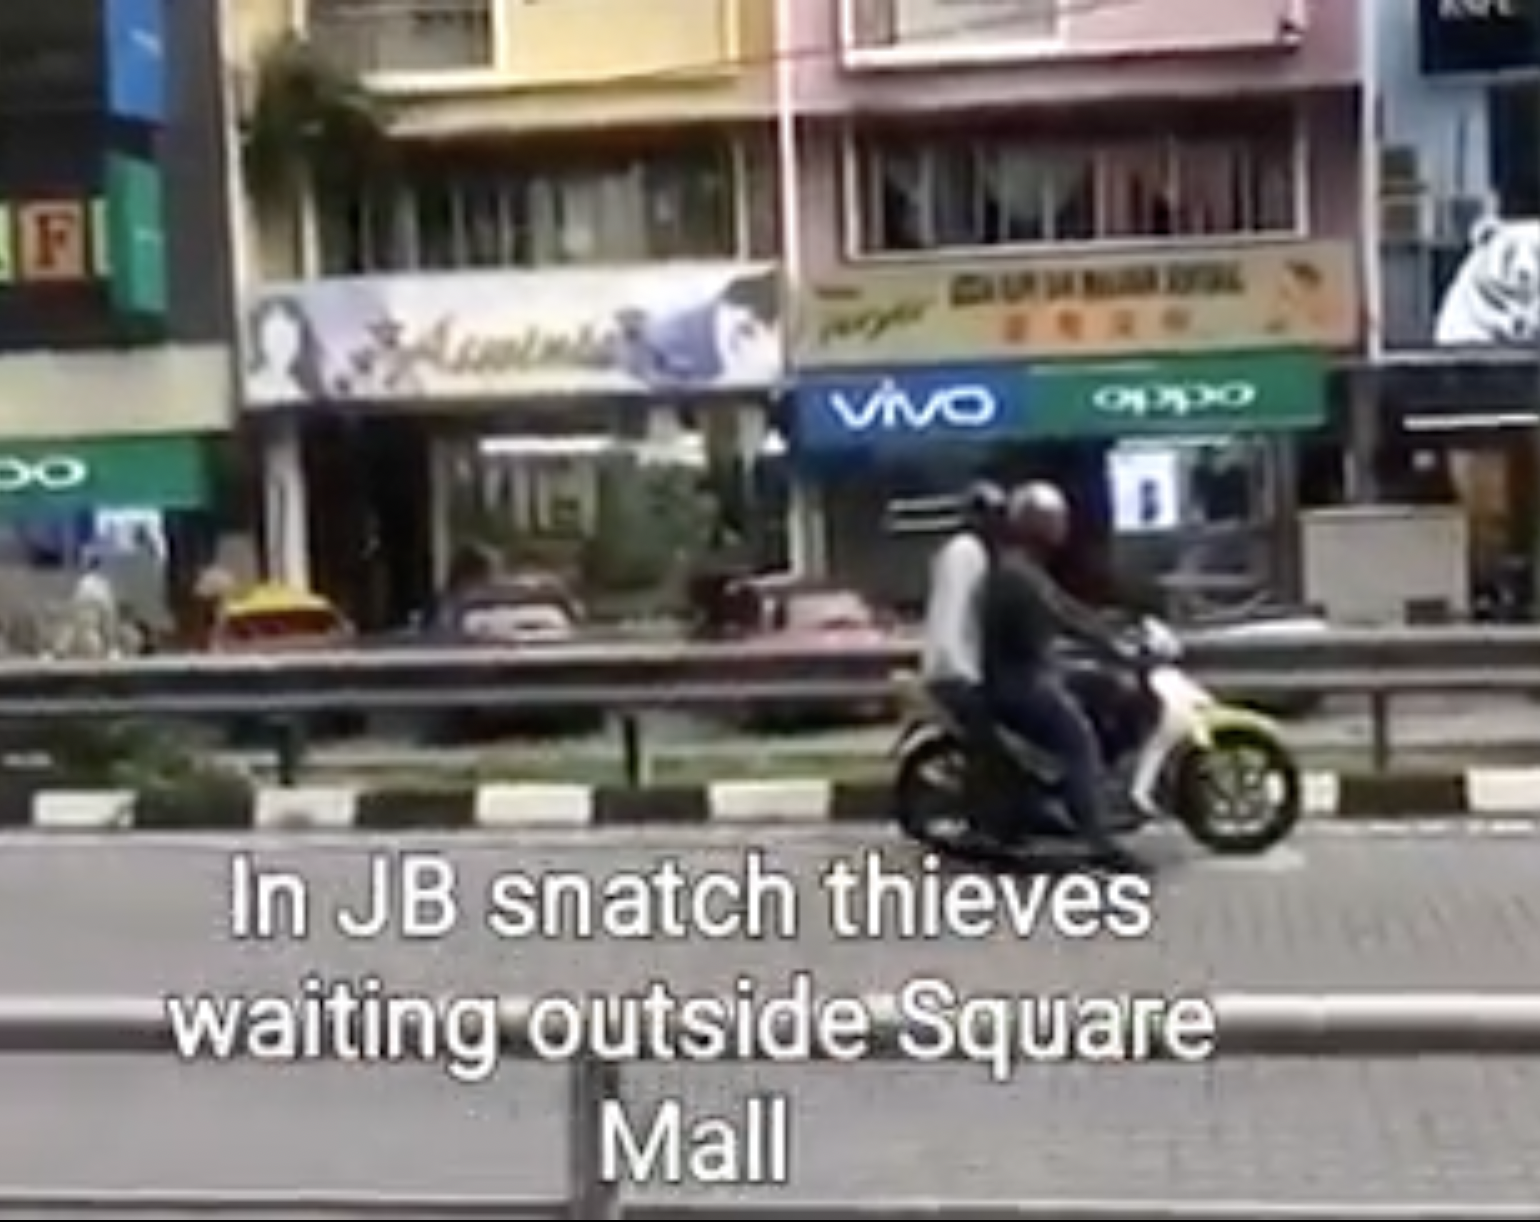 Jb thieves snatch people in front of shopping mall 03